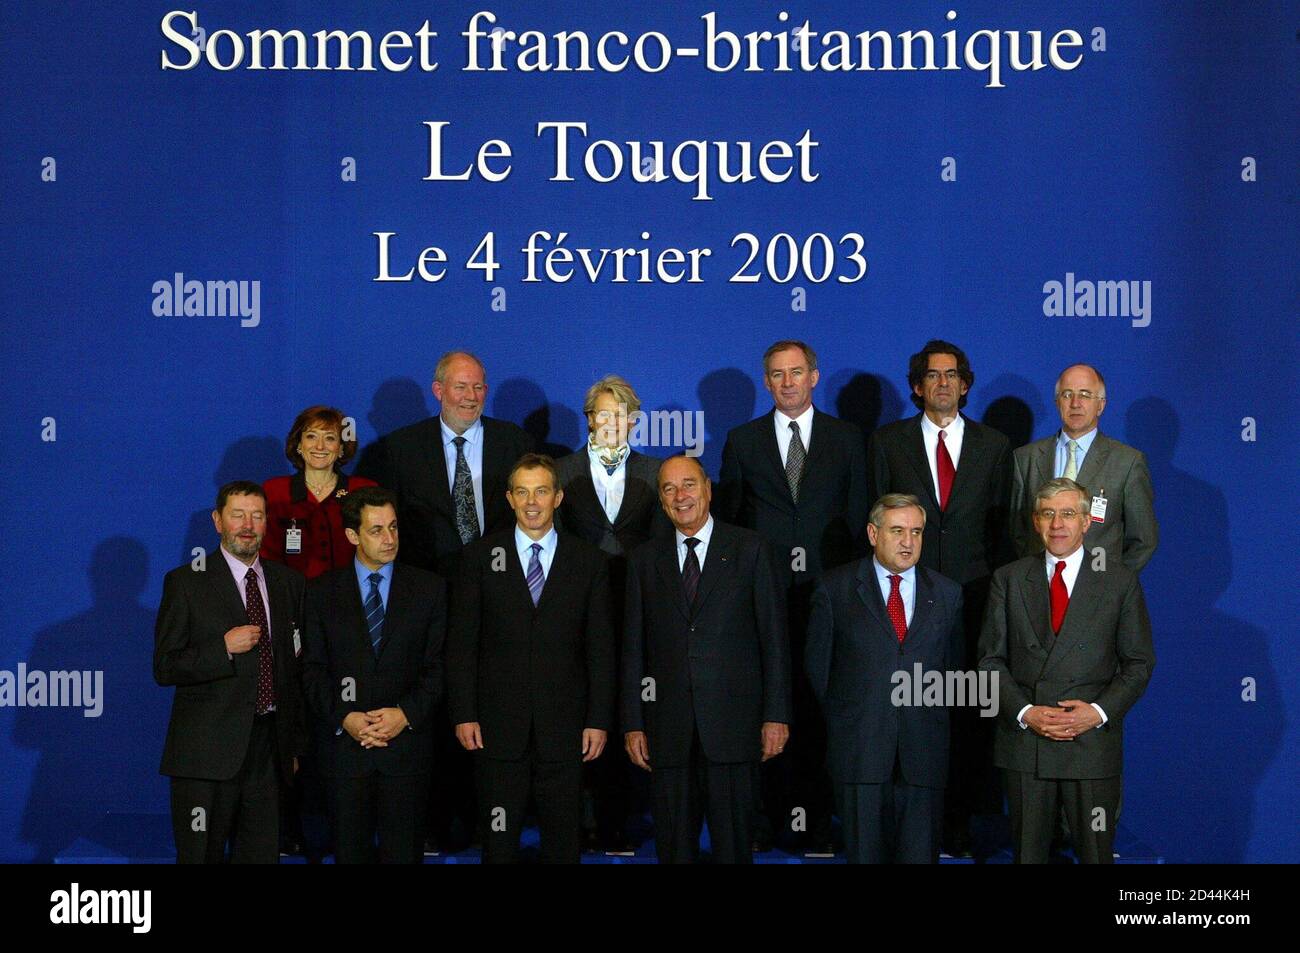 The family photo during the 25th Franco-British Summit in Le Touquet,  February 4, 2003. Top row, left to right, French Minister for European  Affairs Noelle Lenoir, British Education Minister Charles Clarke, French